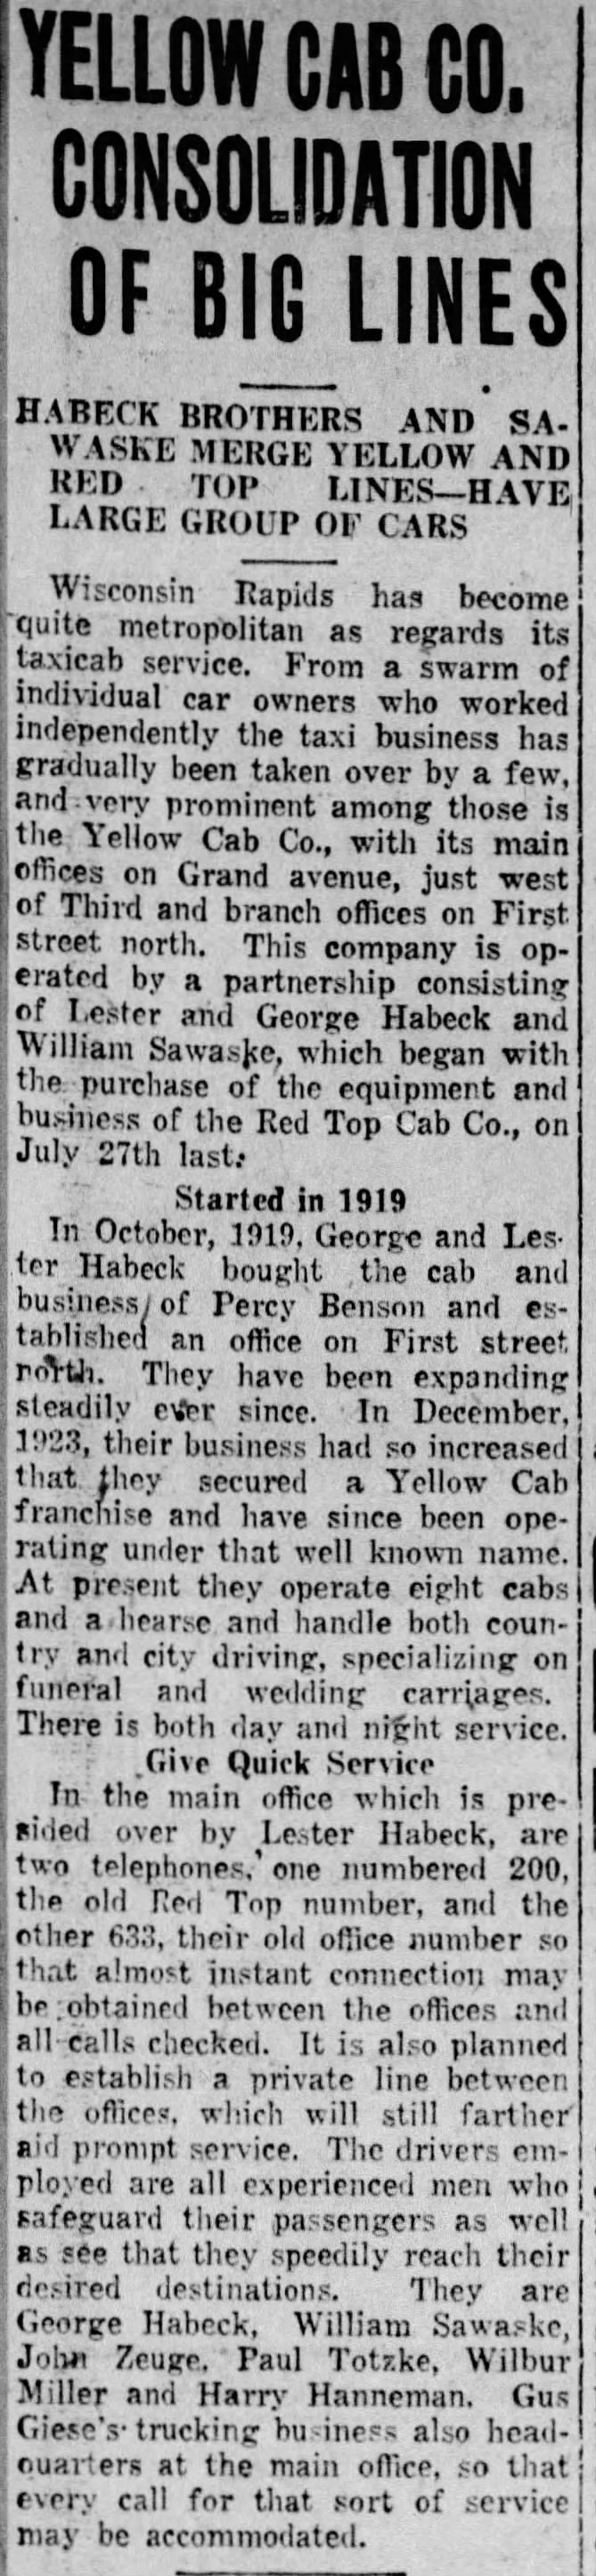 Lester and George Habeck's taxi venture 1925.